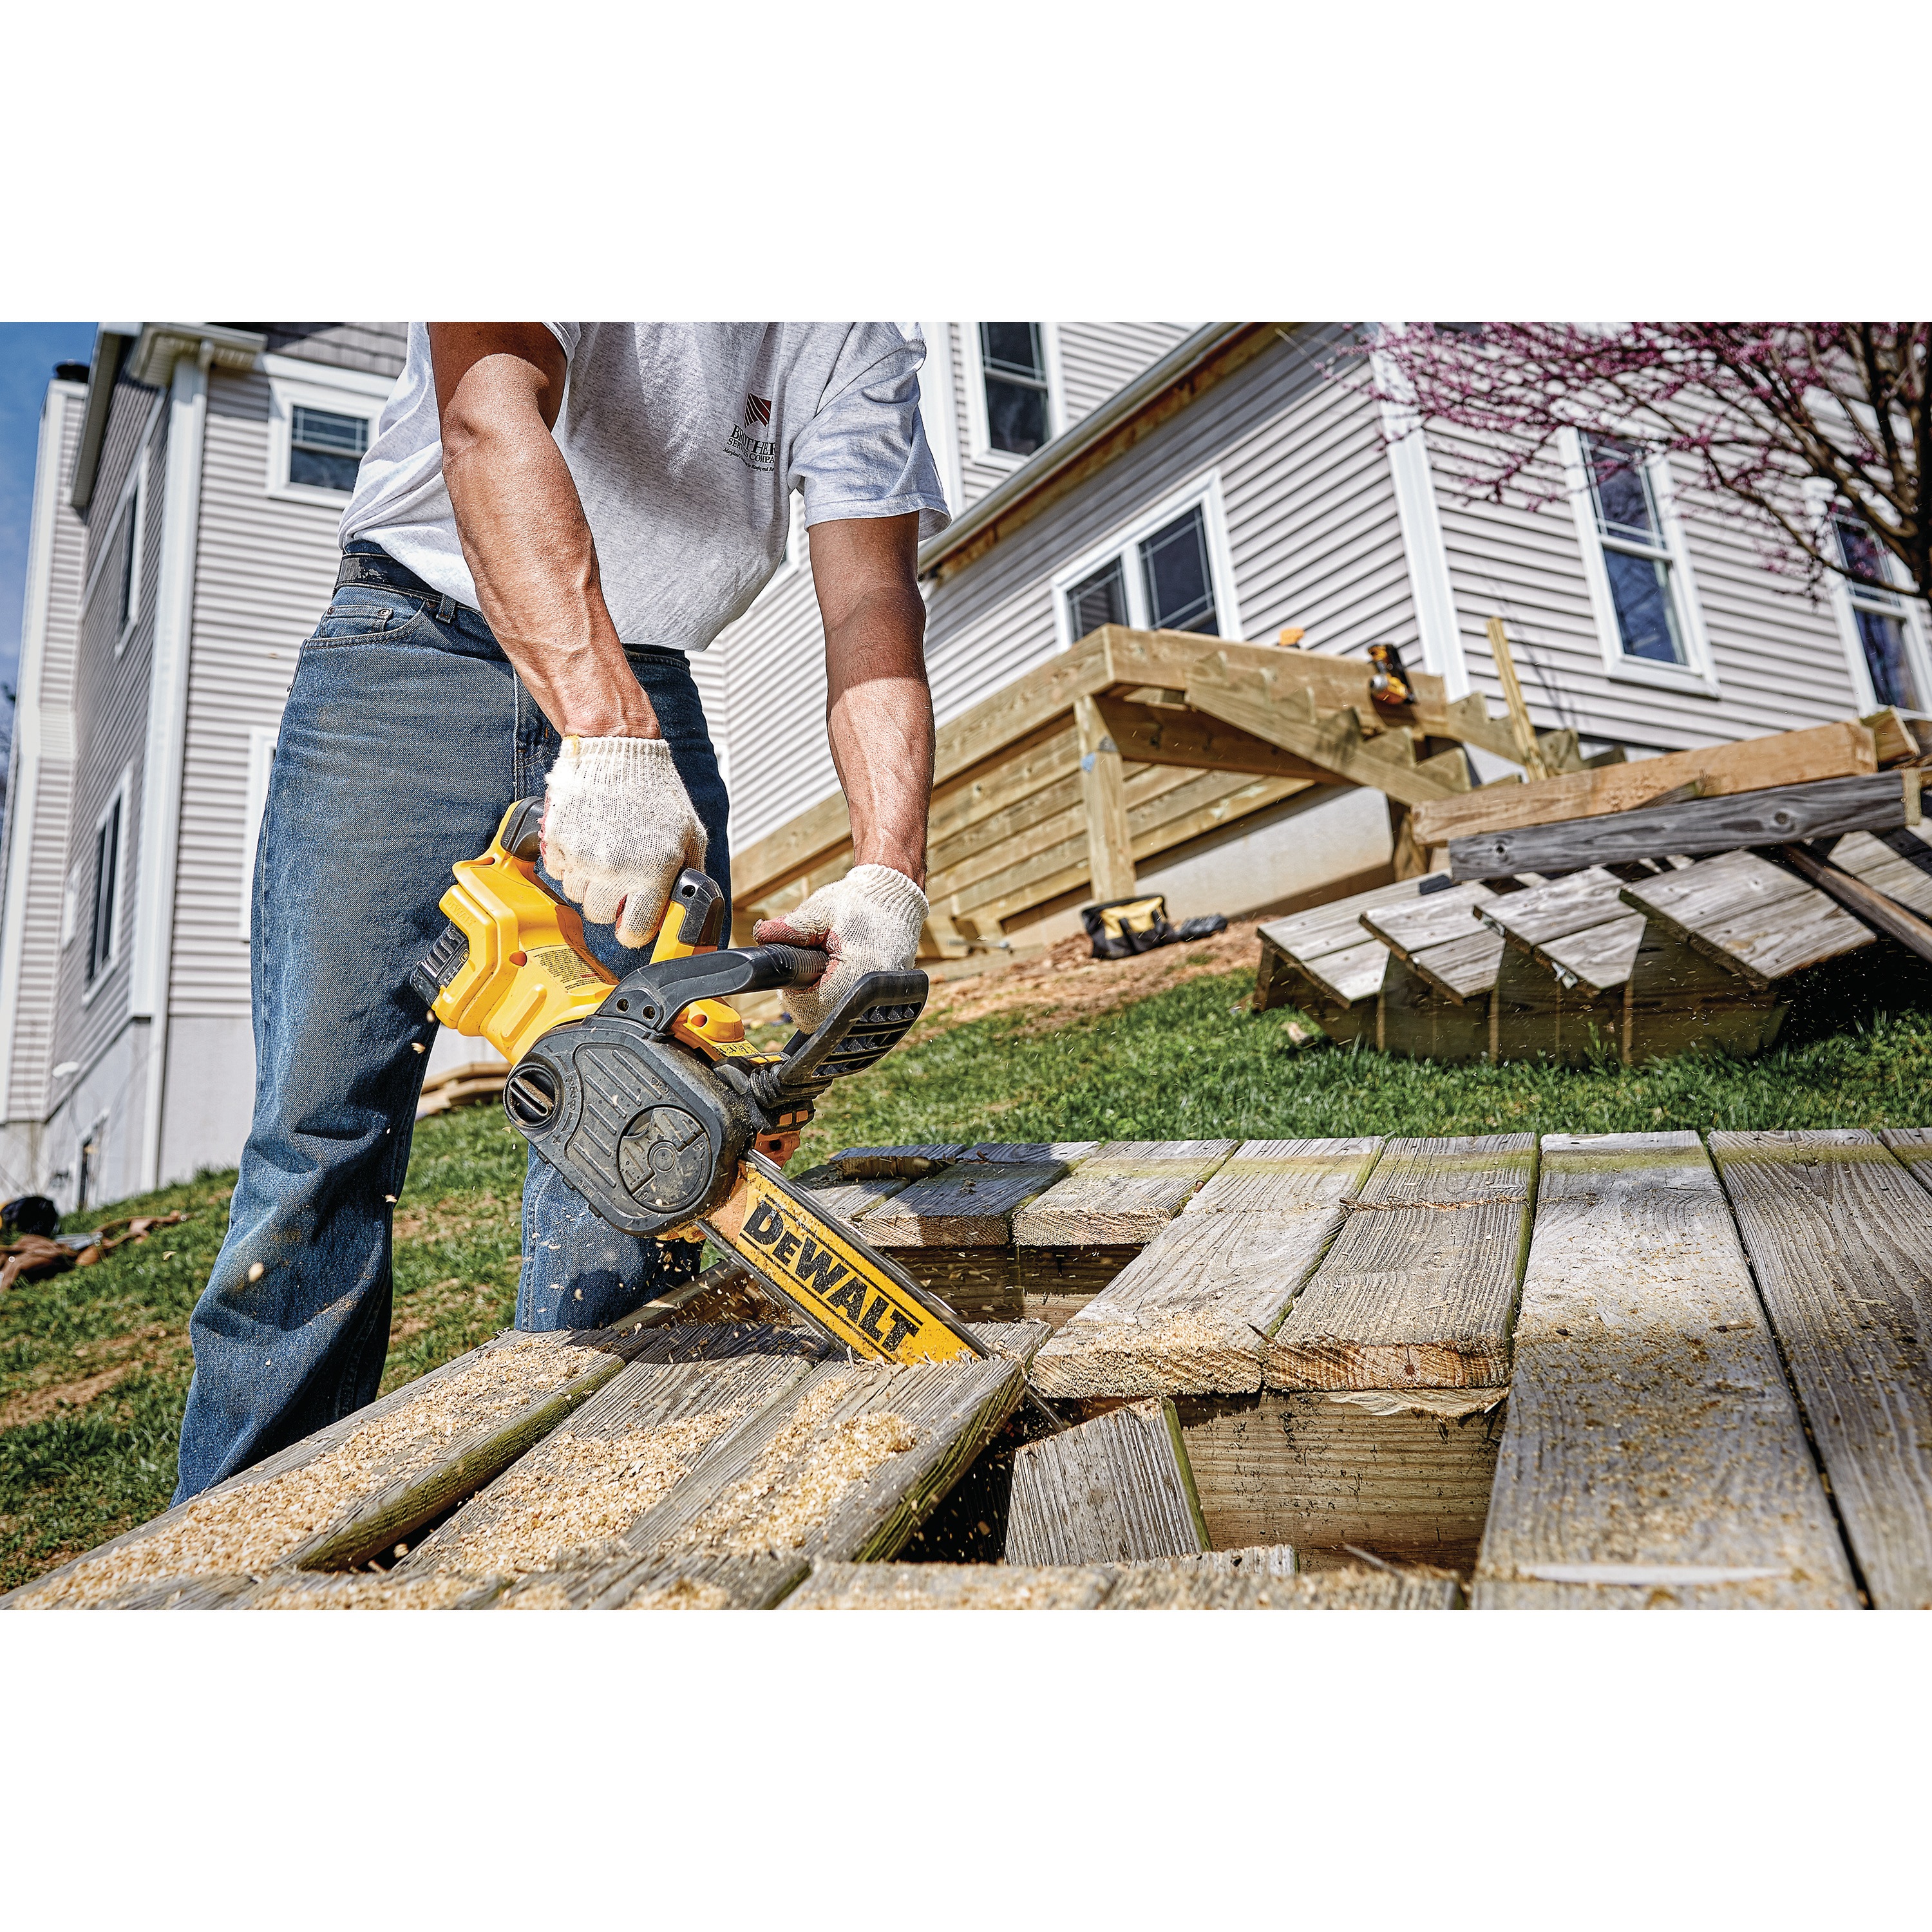 XR® Compact 12 inch Cordless Chainsaw being used by a person to cut through wooden planks outdoors